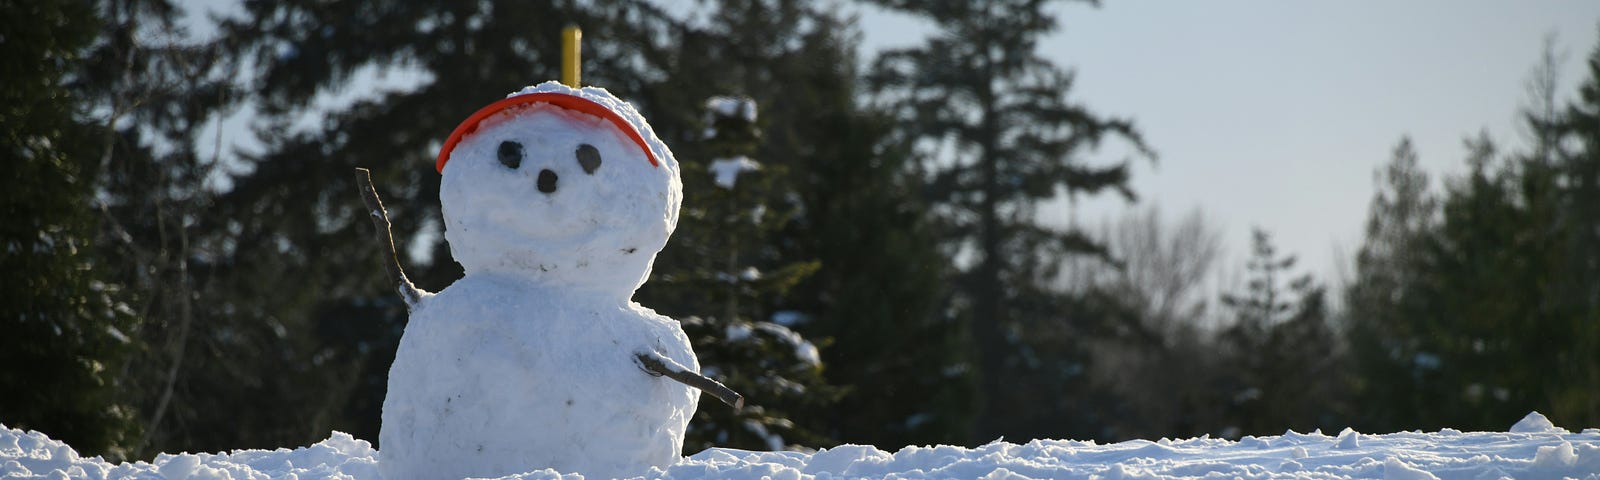 image of a snowman